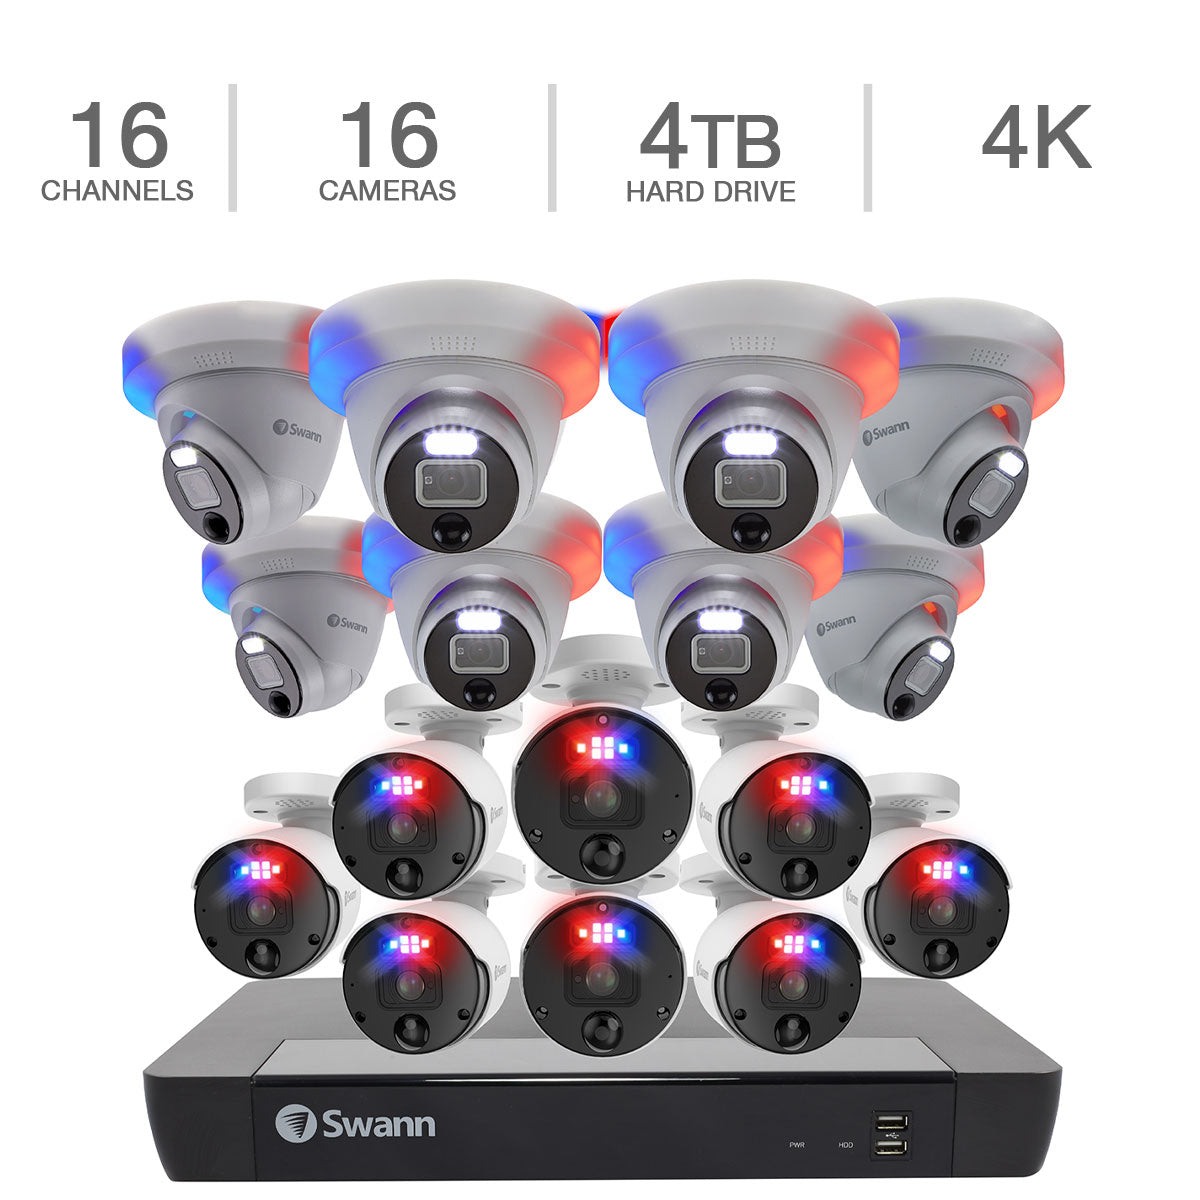 Swann Pro Enforcer 4K Ultra HD Indoor/Outdoor Wired Security Camera System, 16-Channel NVR 4TB HDD, 8 Bullet & 8 Dome Cameras w/ Two-Way Audio & Siren Image